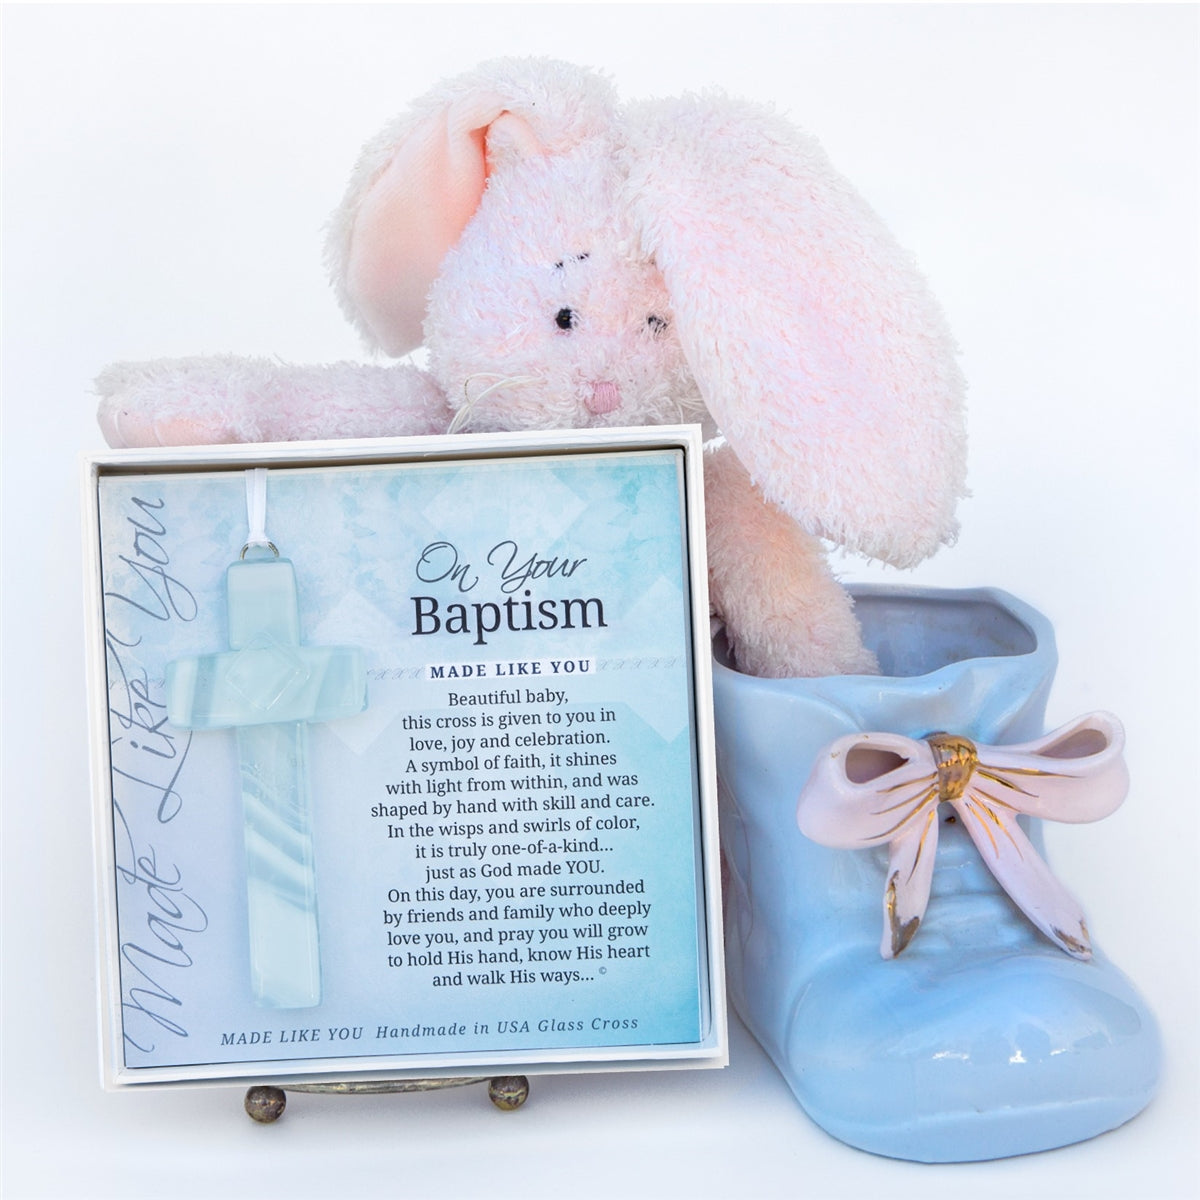 Baptism Cross Gift in a nursery setting.